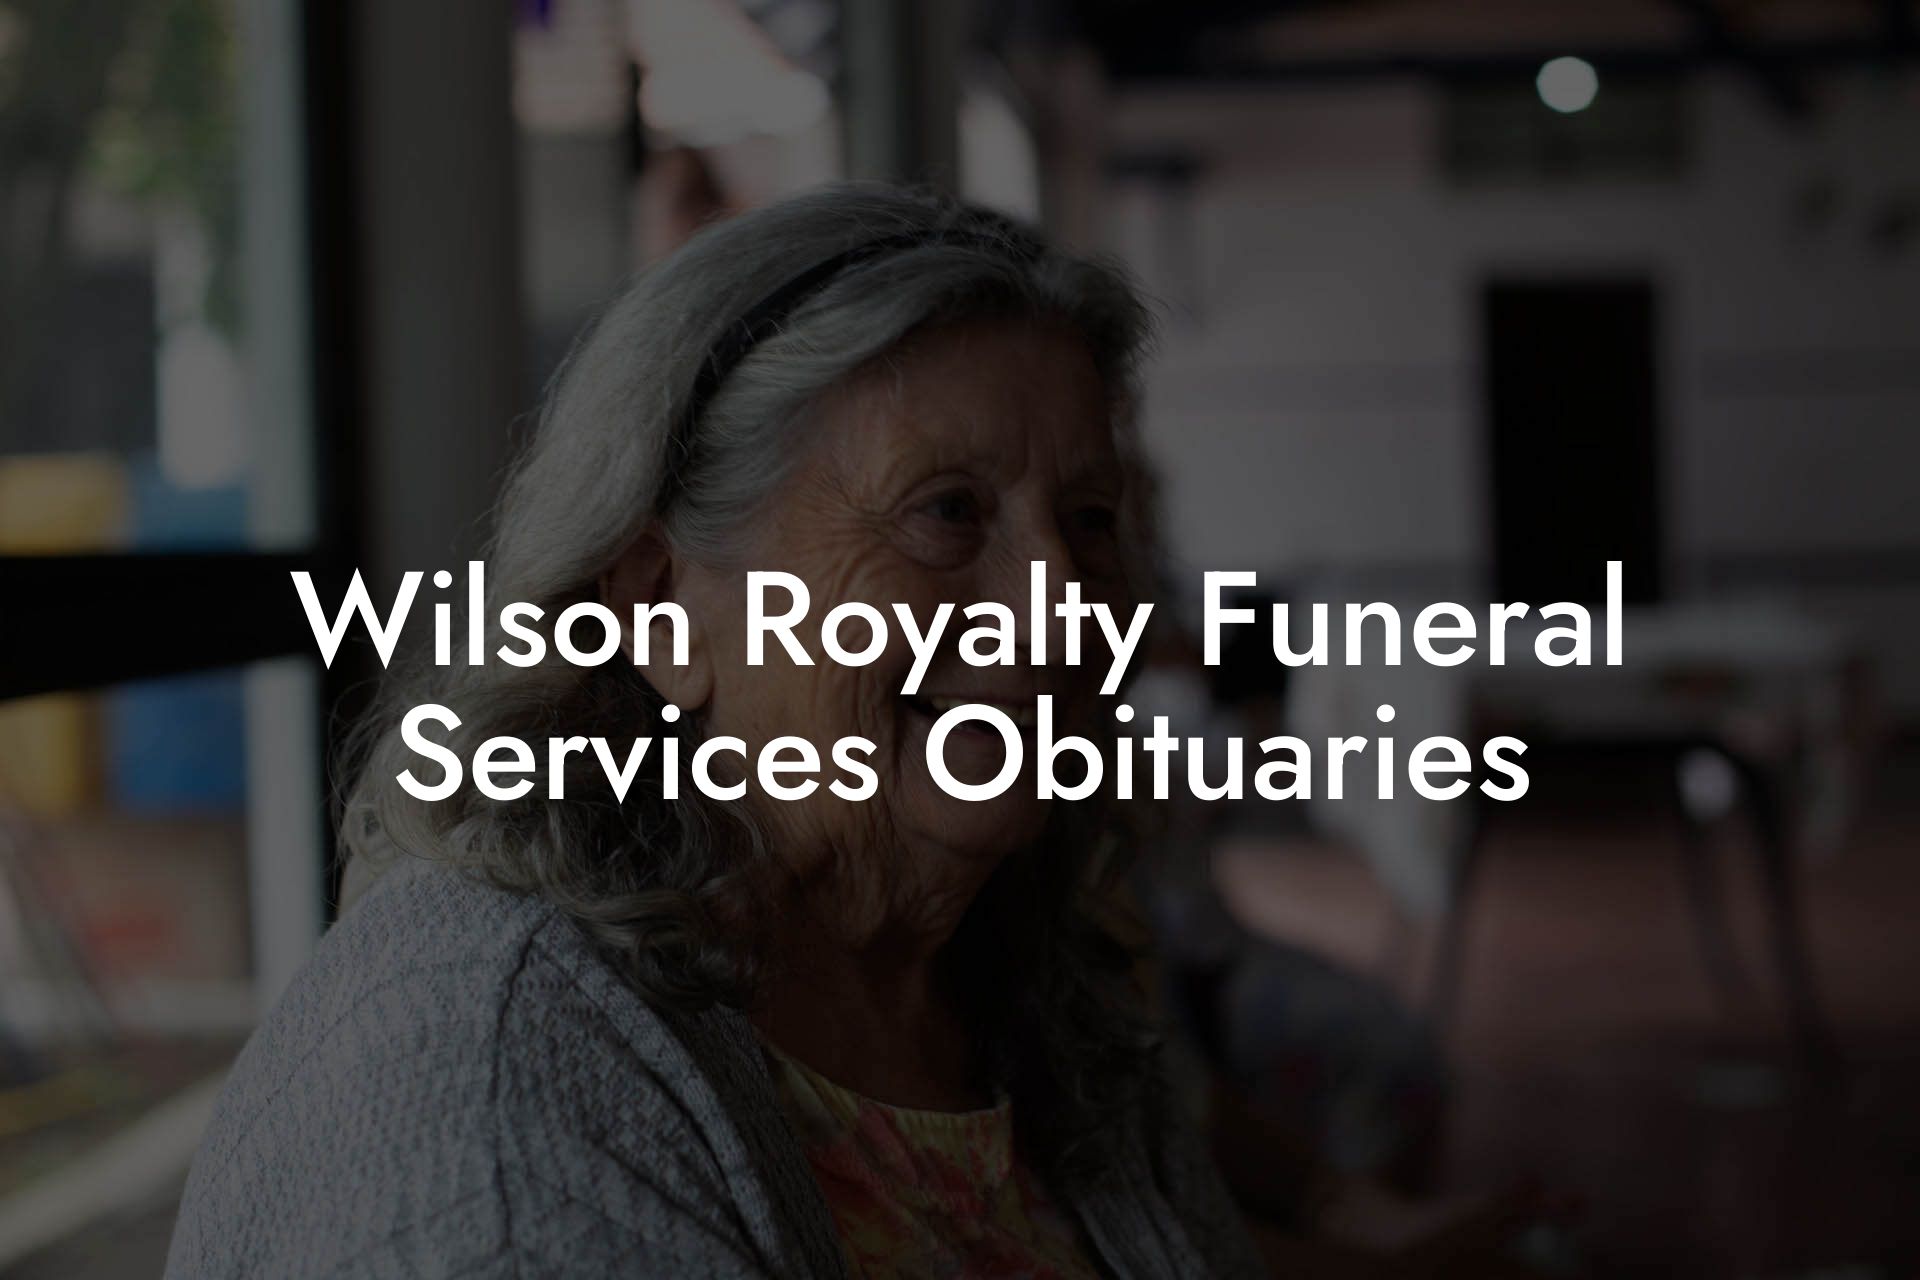 Wilson Royalty Funeral Services Obituaries